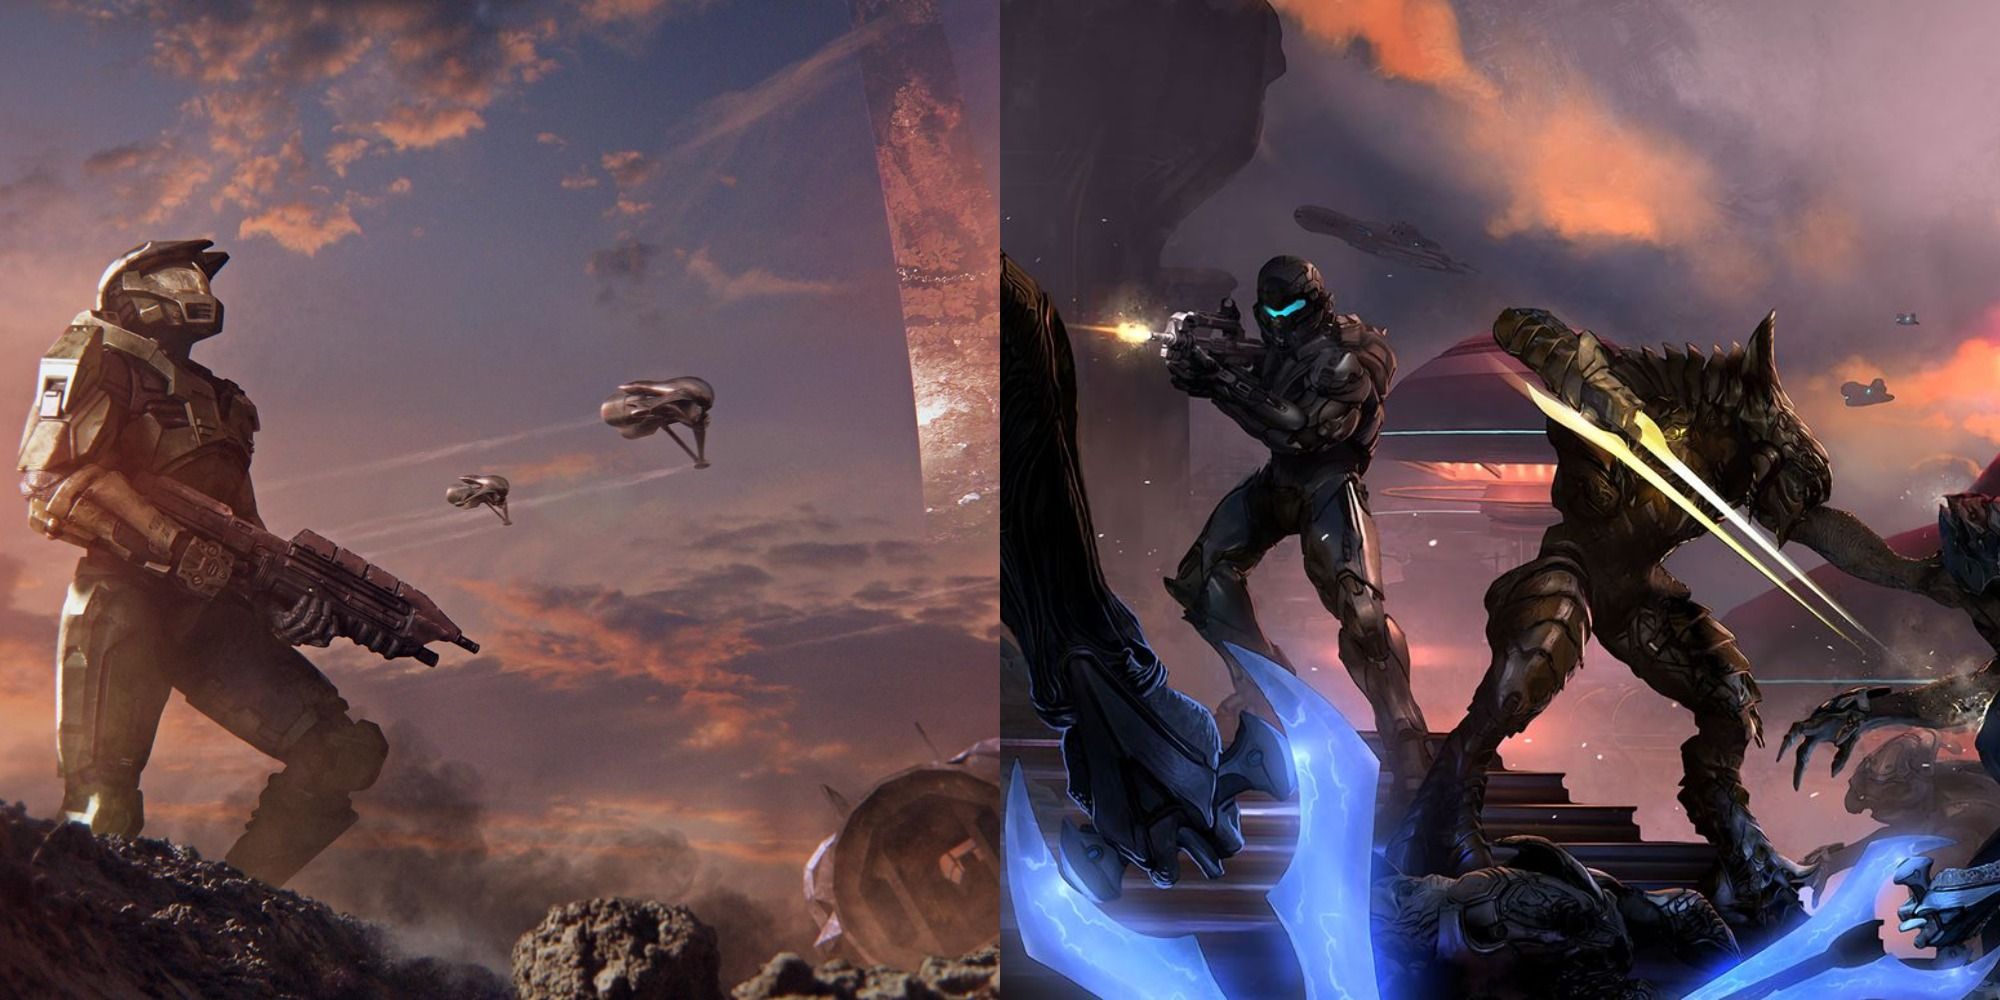 Split image showing a Halo character looking up and two characters fighting